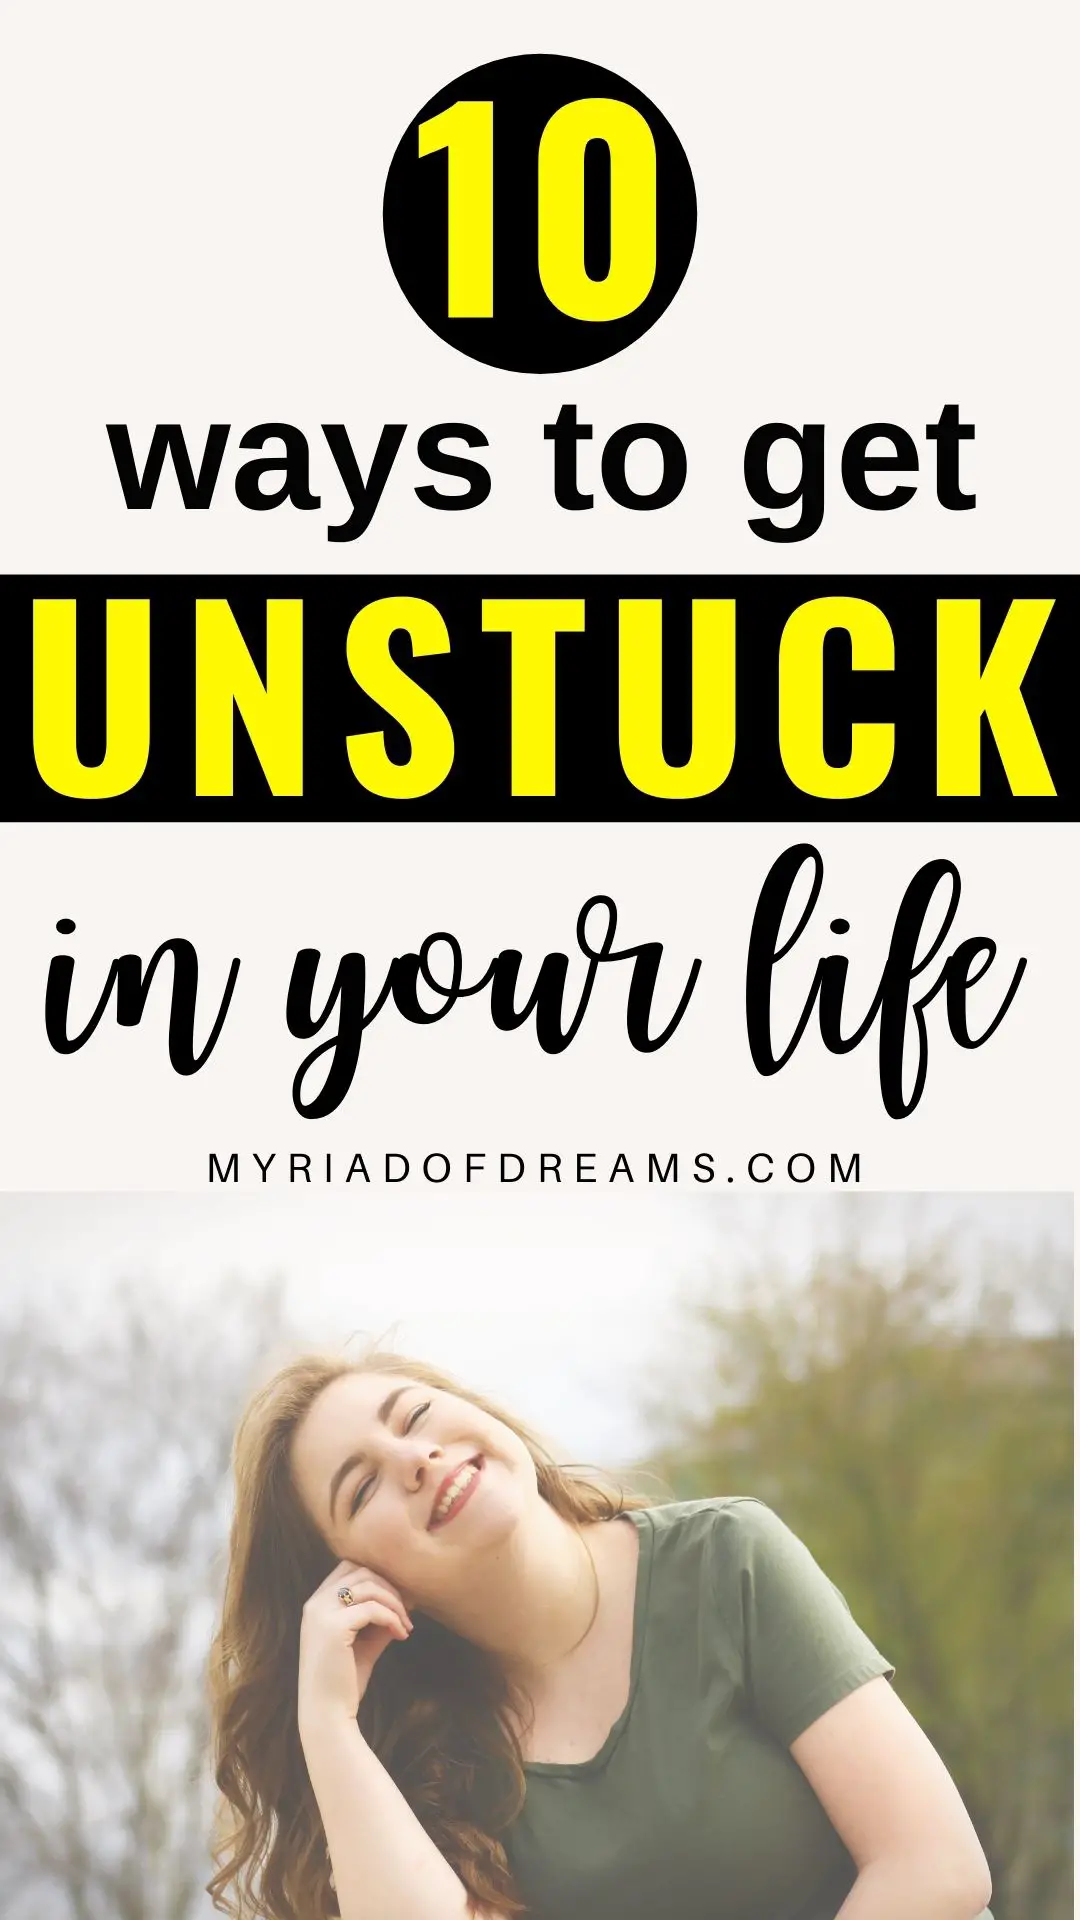 A pinnable image with 10 ways to get unstuck. A woman is smiling outdoors.